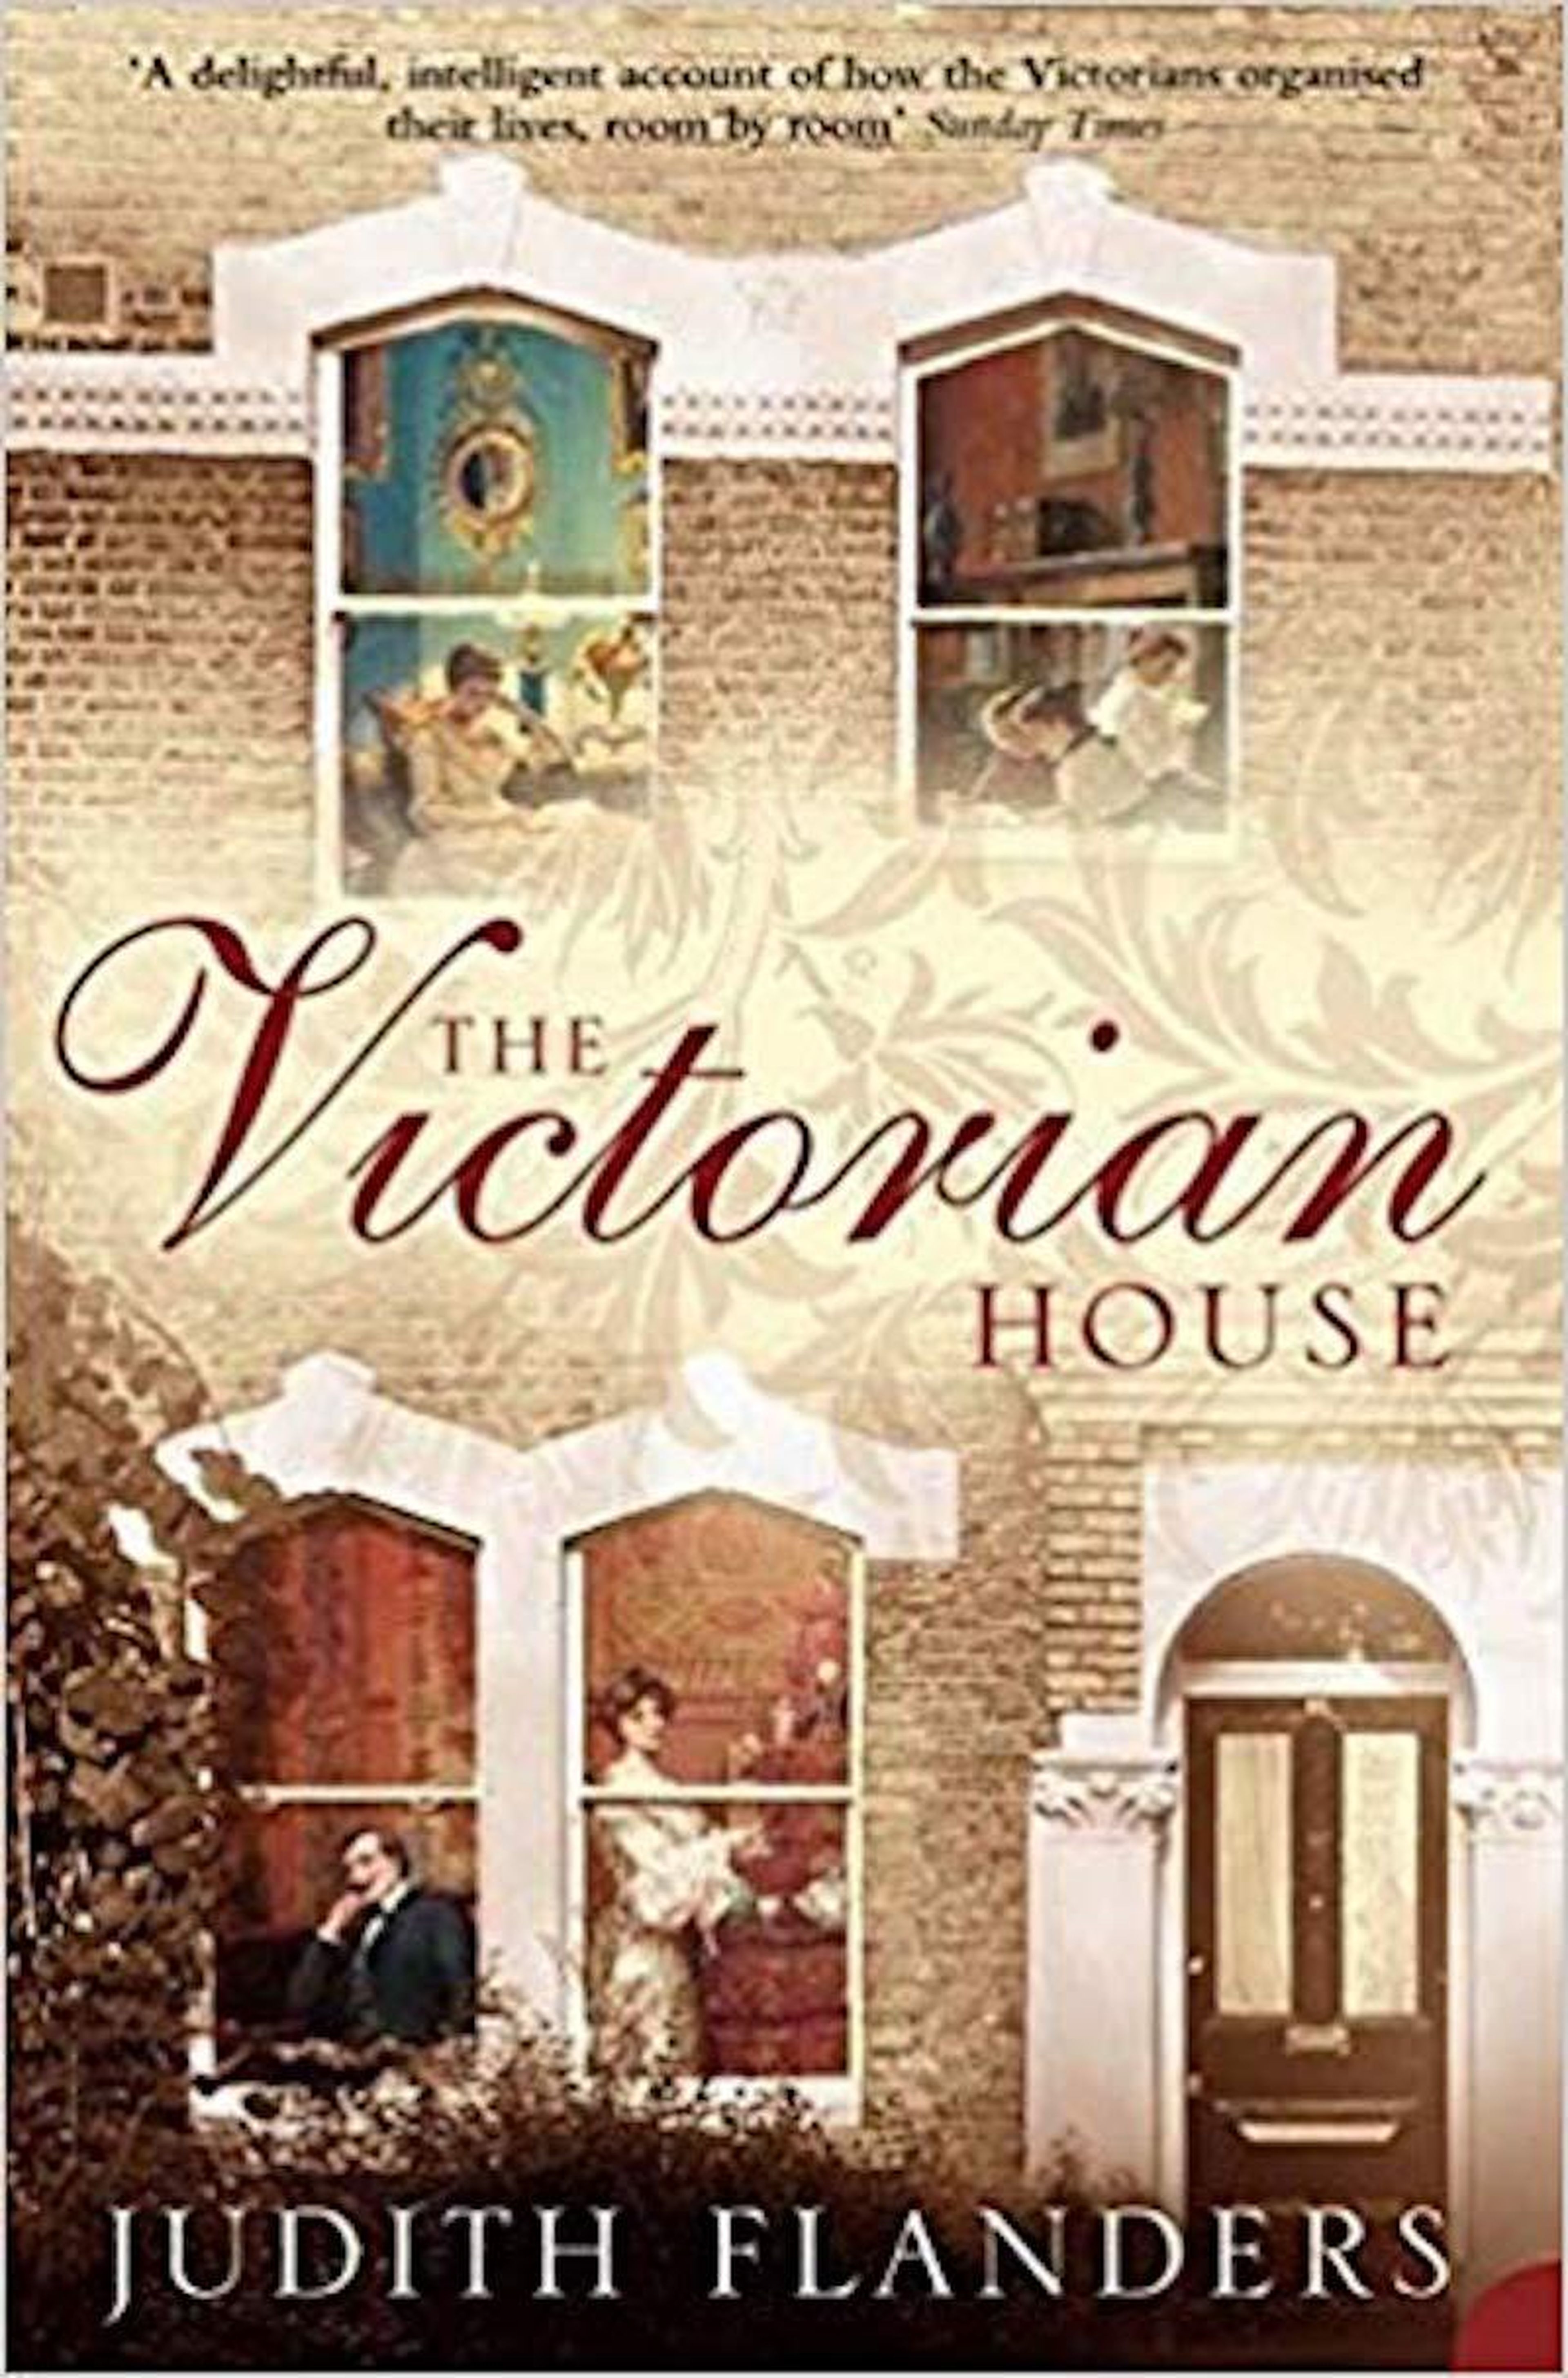 "The Victorian House: Domestic Life from Childbirth to Deathbed" by Judith Flanders